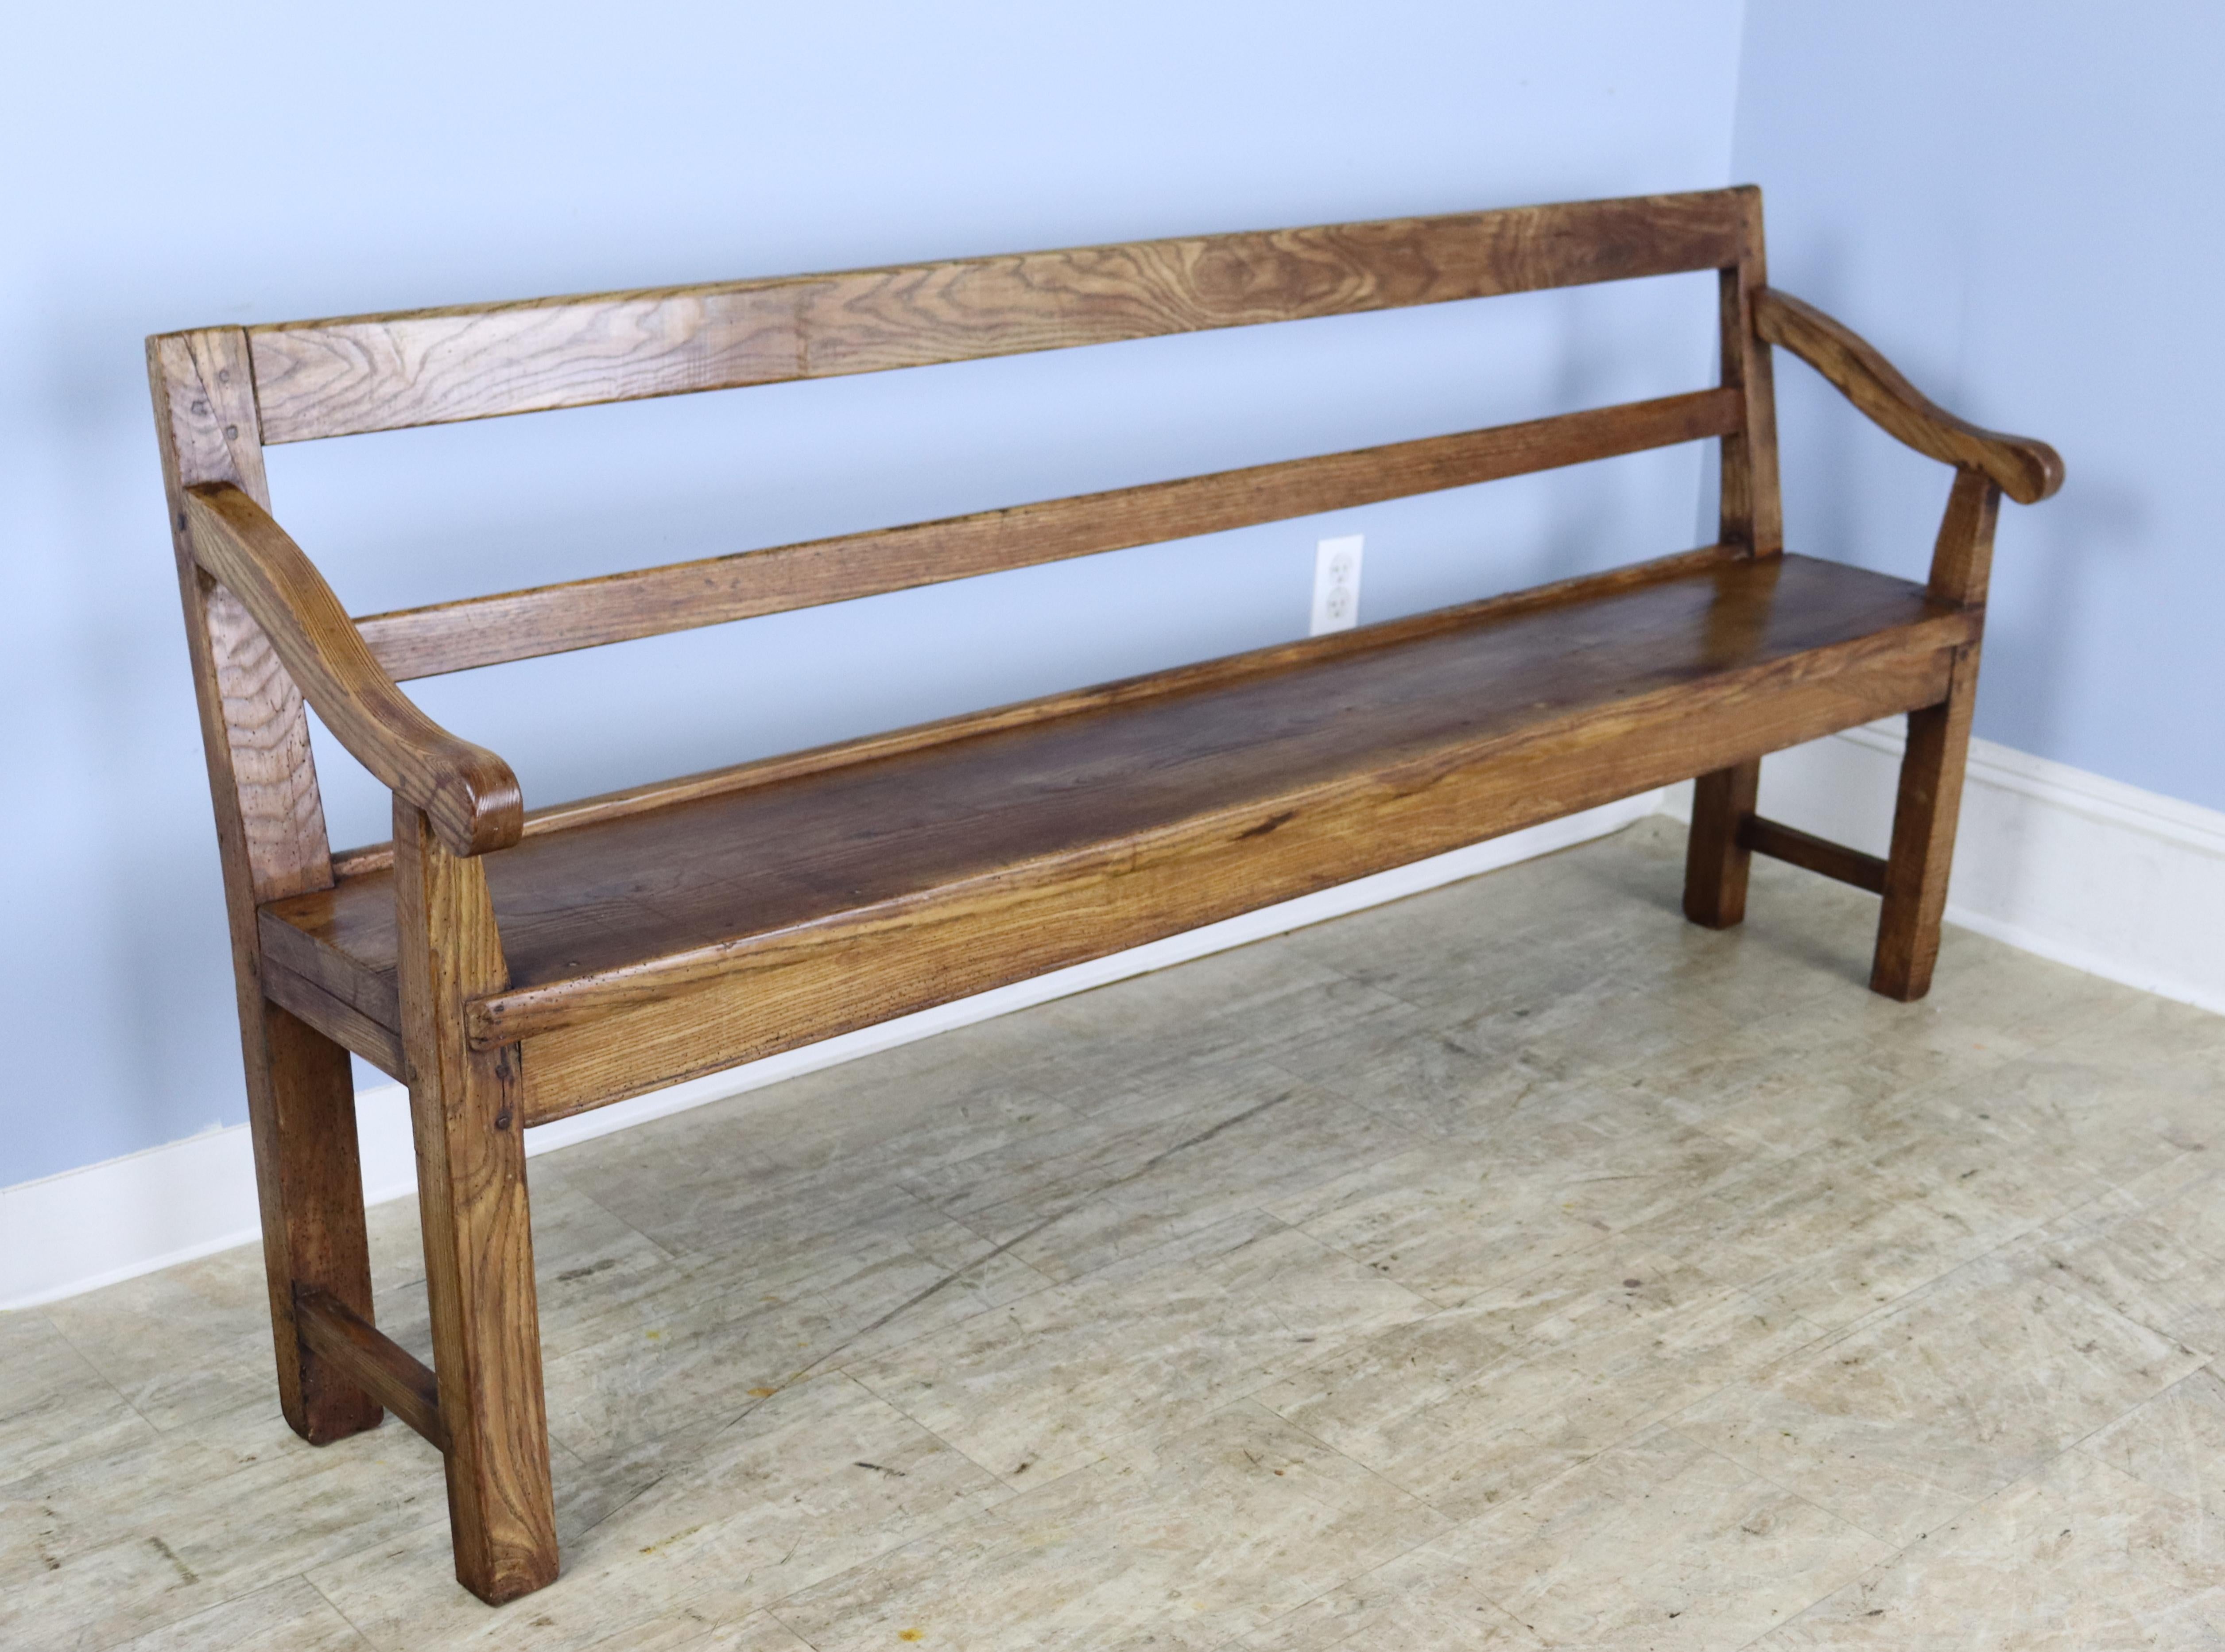 A classic sleight armed bench in dramtically grained and patinated ash.  Beautiful color and a nice size for the hallway, mudroom or at the end of a king sized bed.